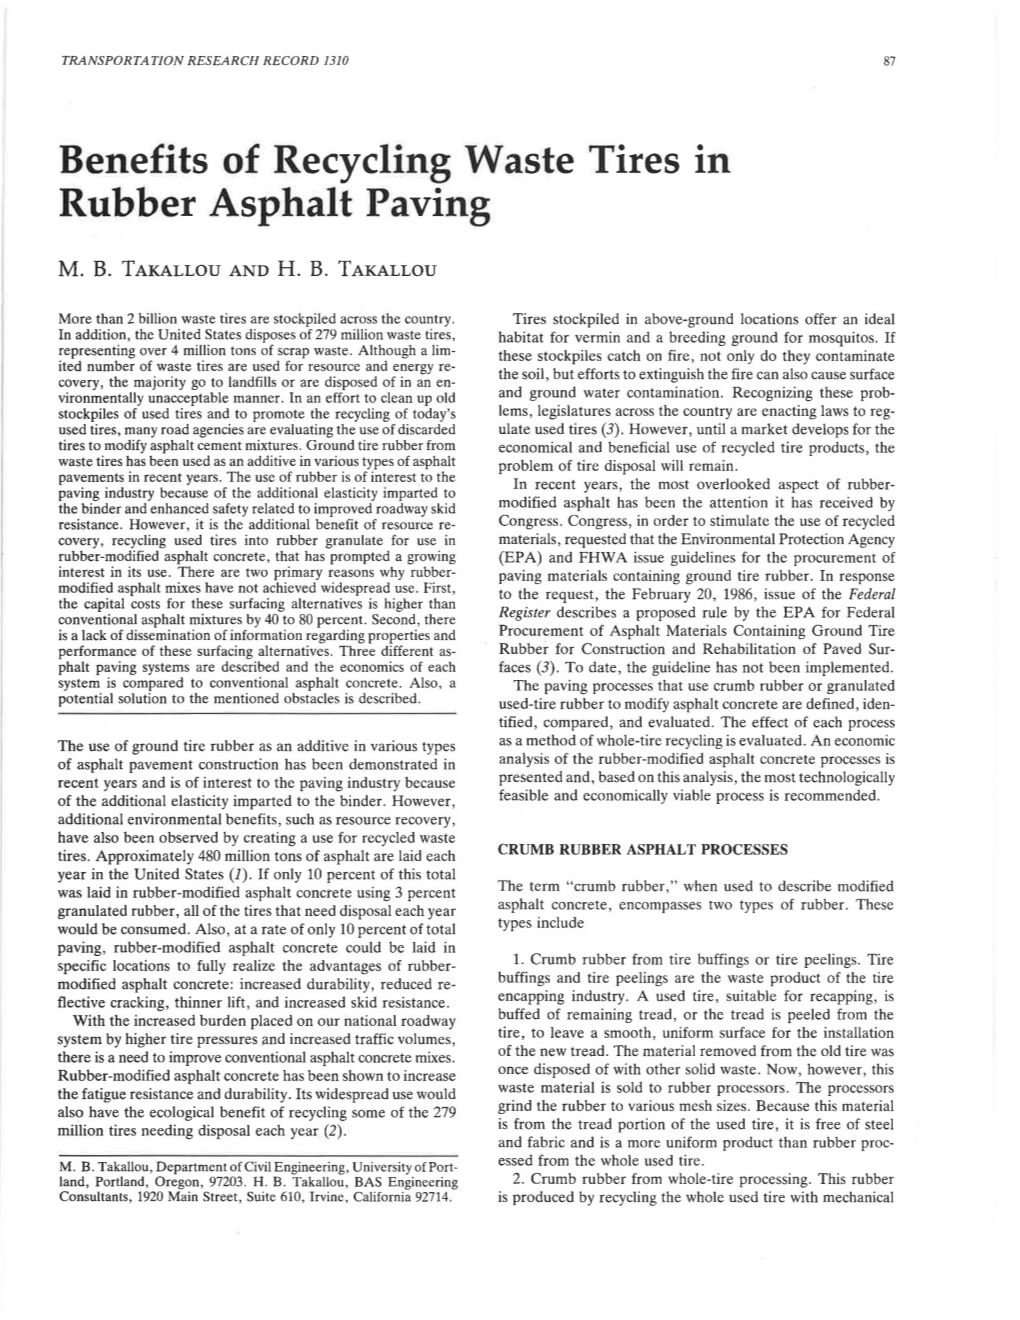 Benefits of Recycling Waste Tires Rubber Asphalt Paving